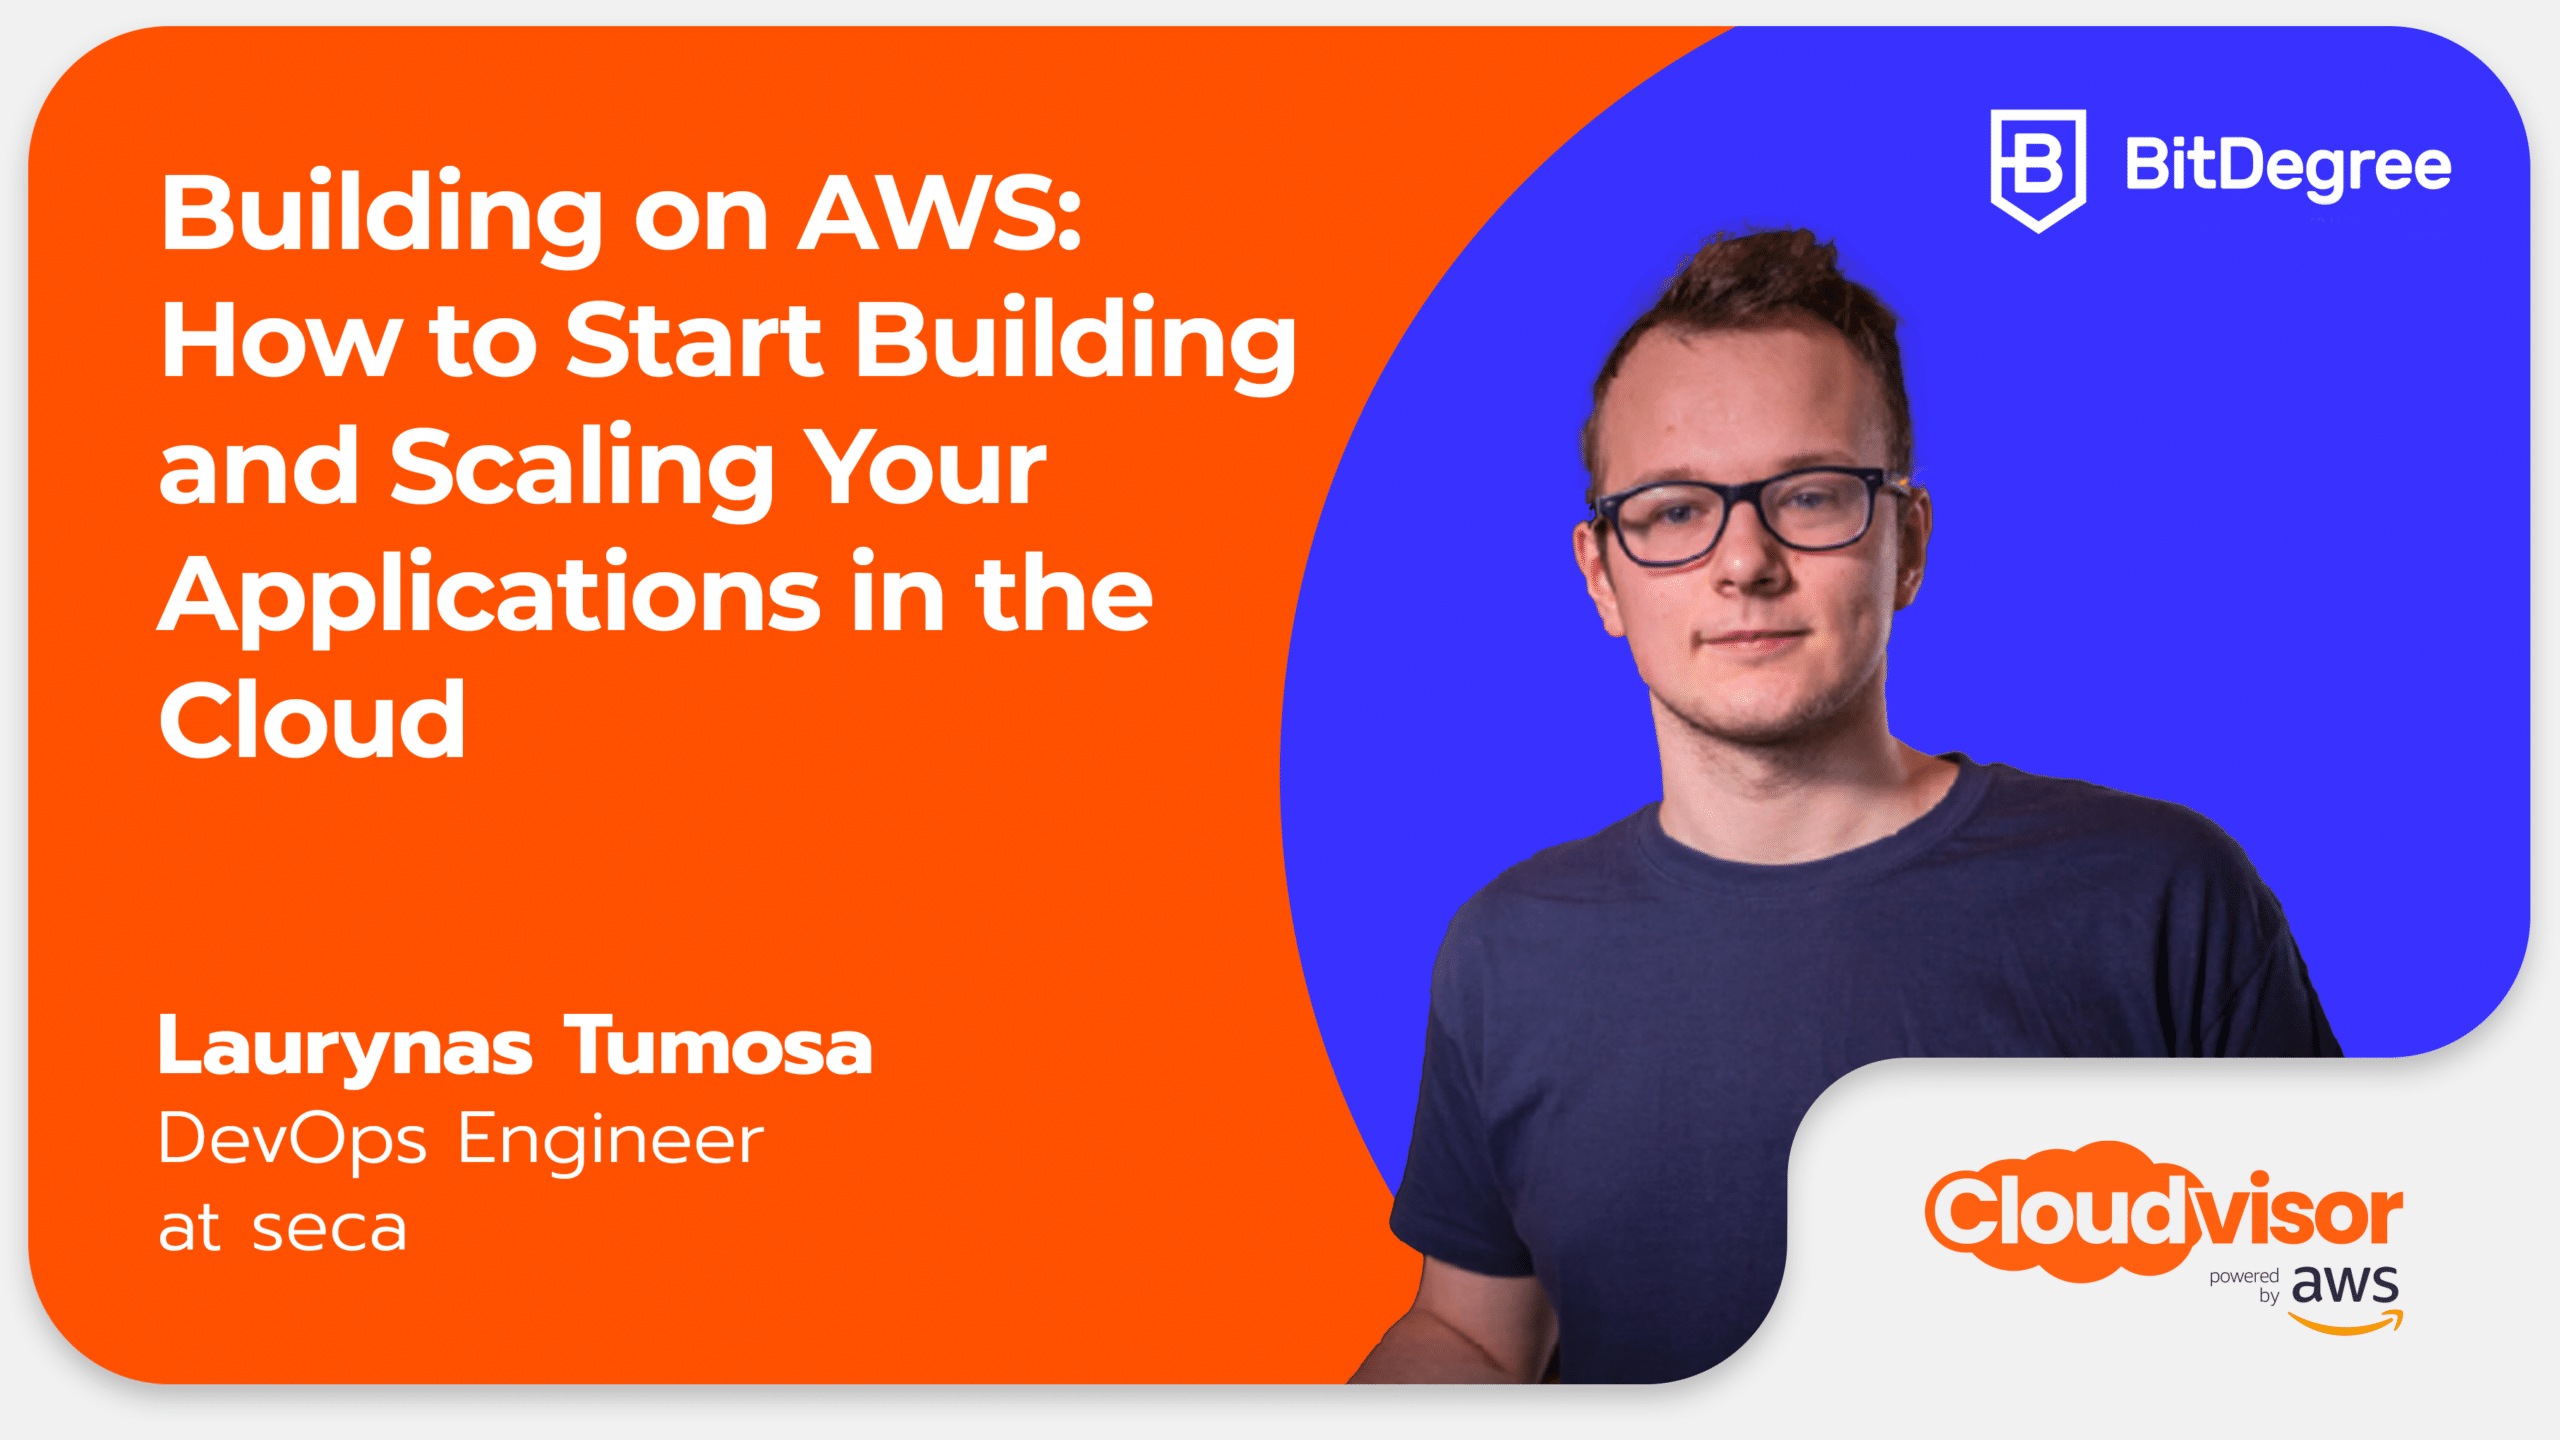 Building on AWS: How to Start Building and Scaling Your Applications in the Cloud